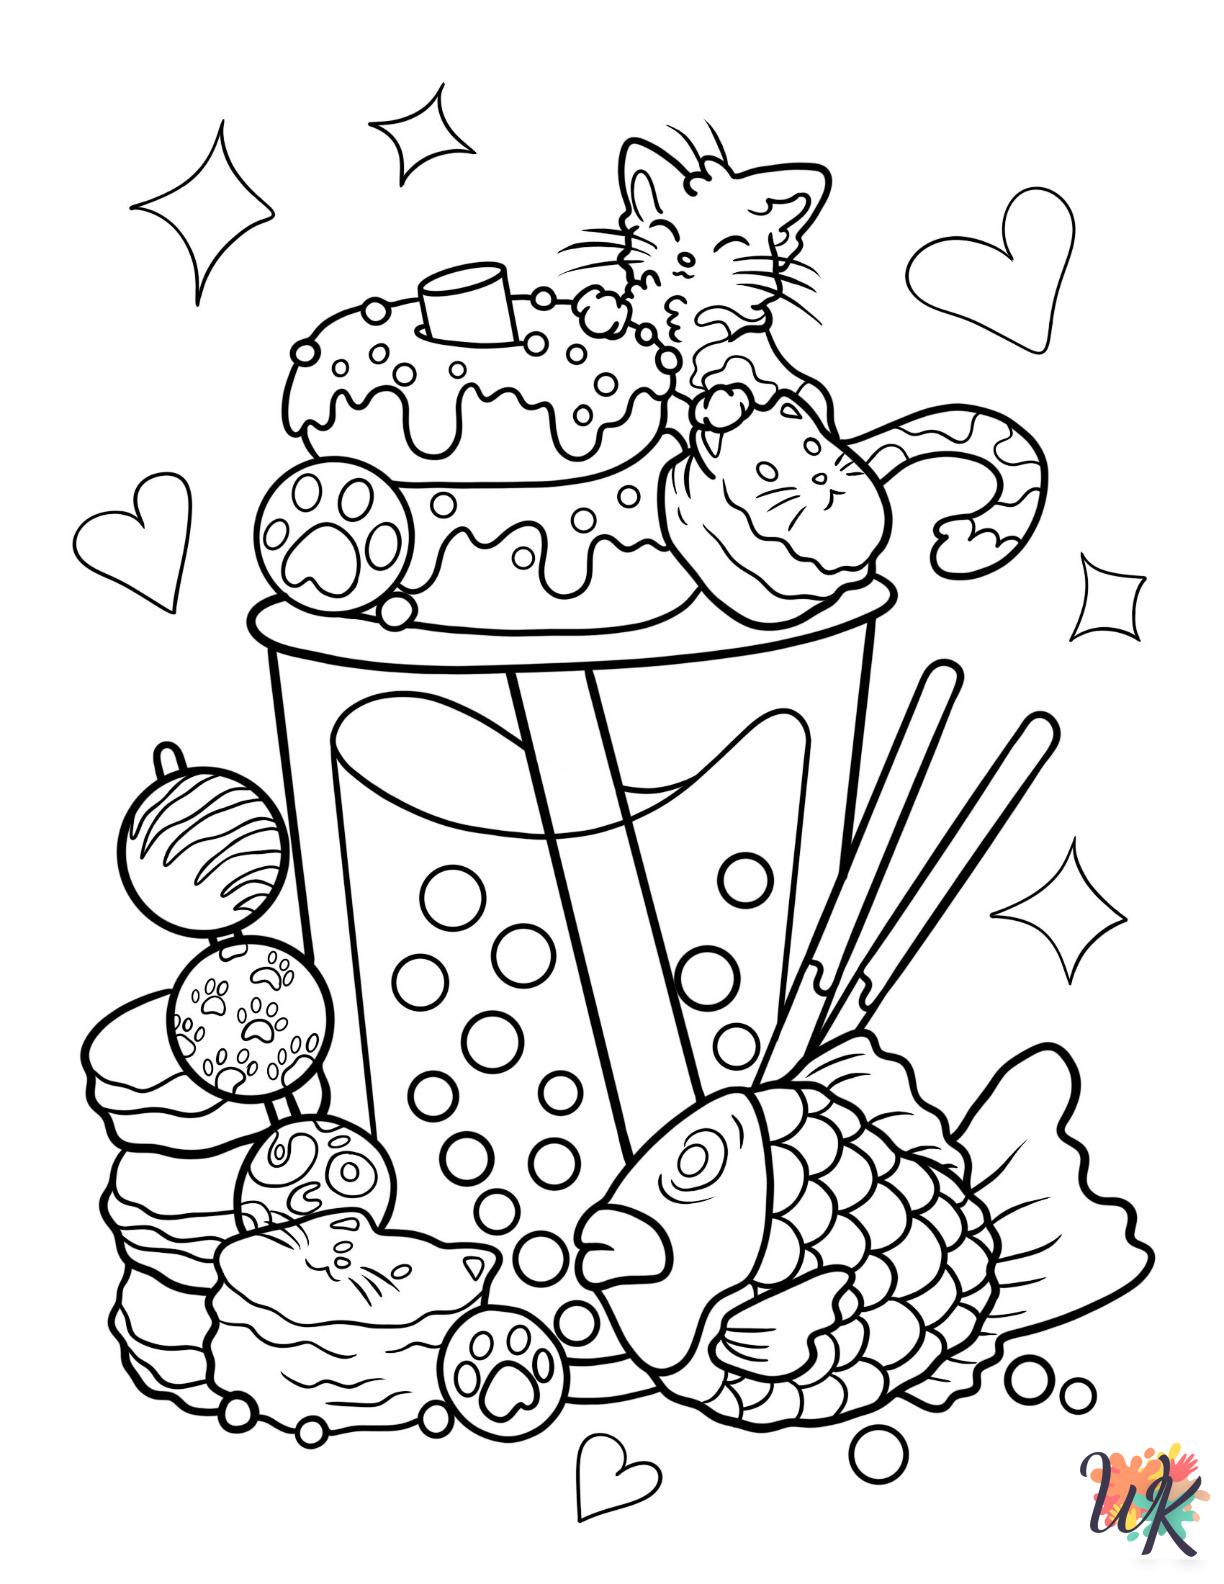 easy cute Boba Tea coloring pages